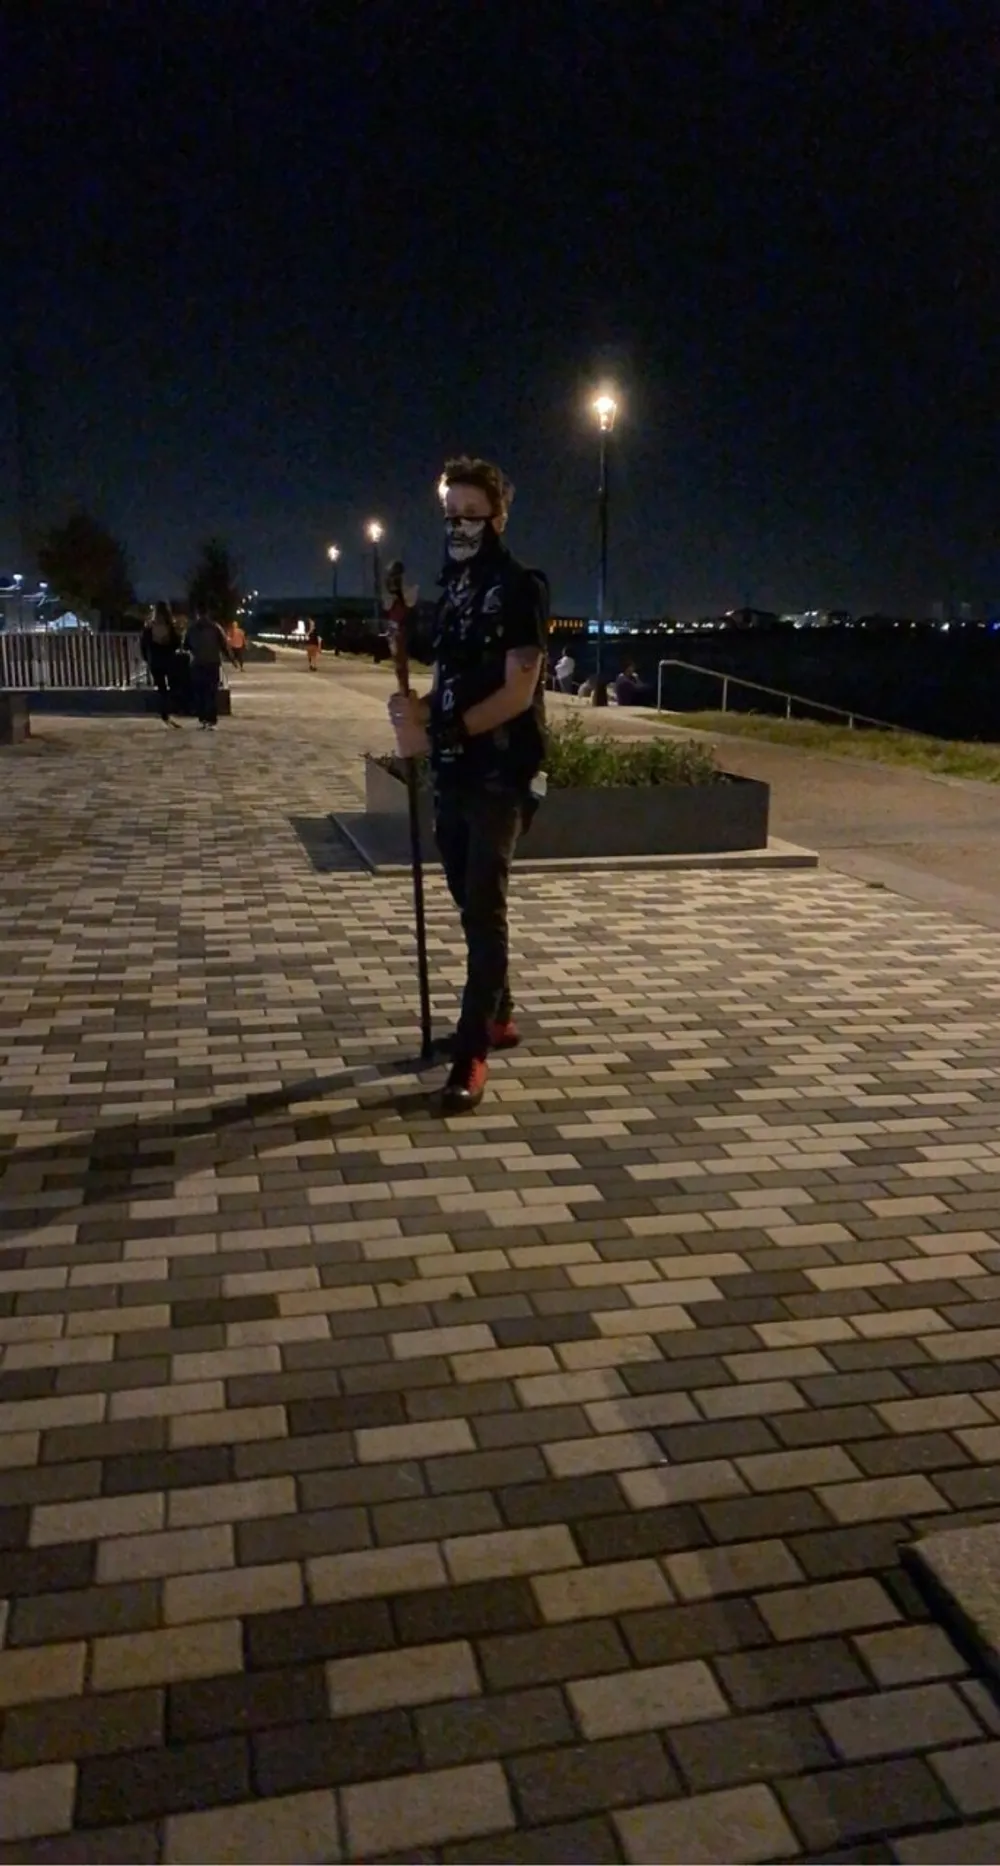 A person wearing a mask is standing on a paved walkway at night holding a walking stick with streetlights and people in the distant background